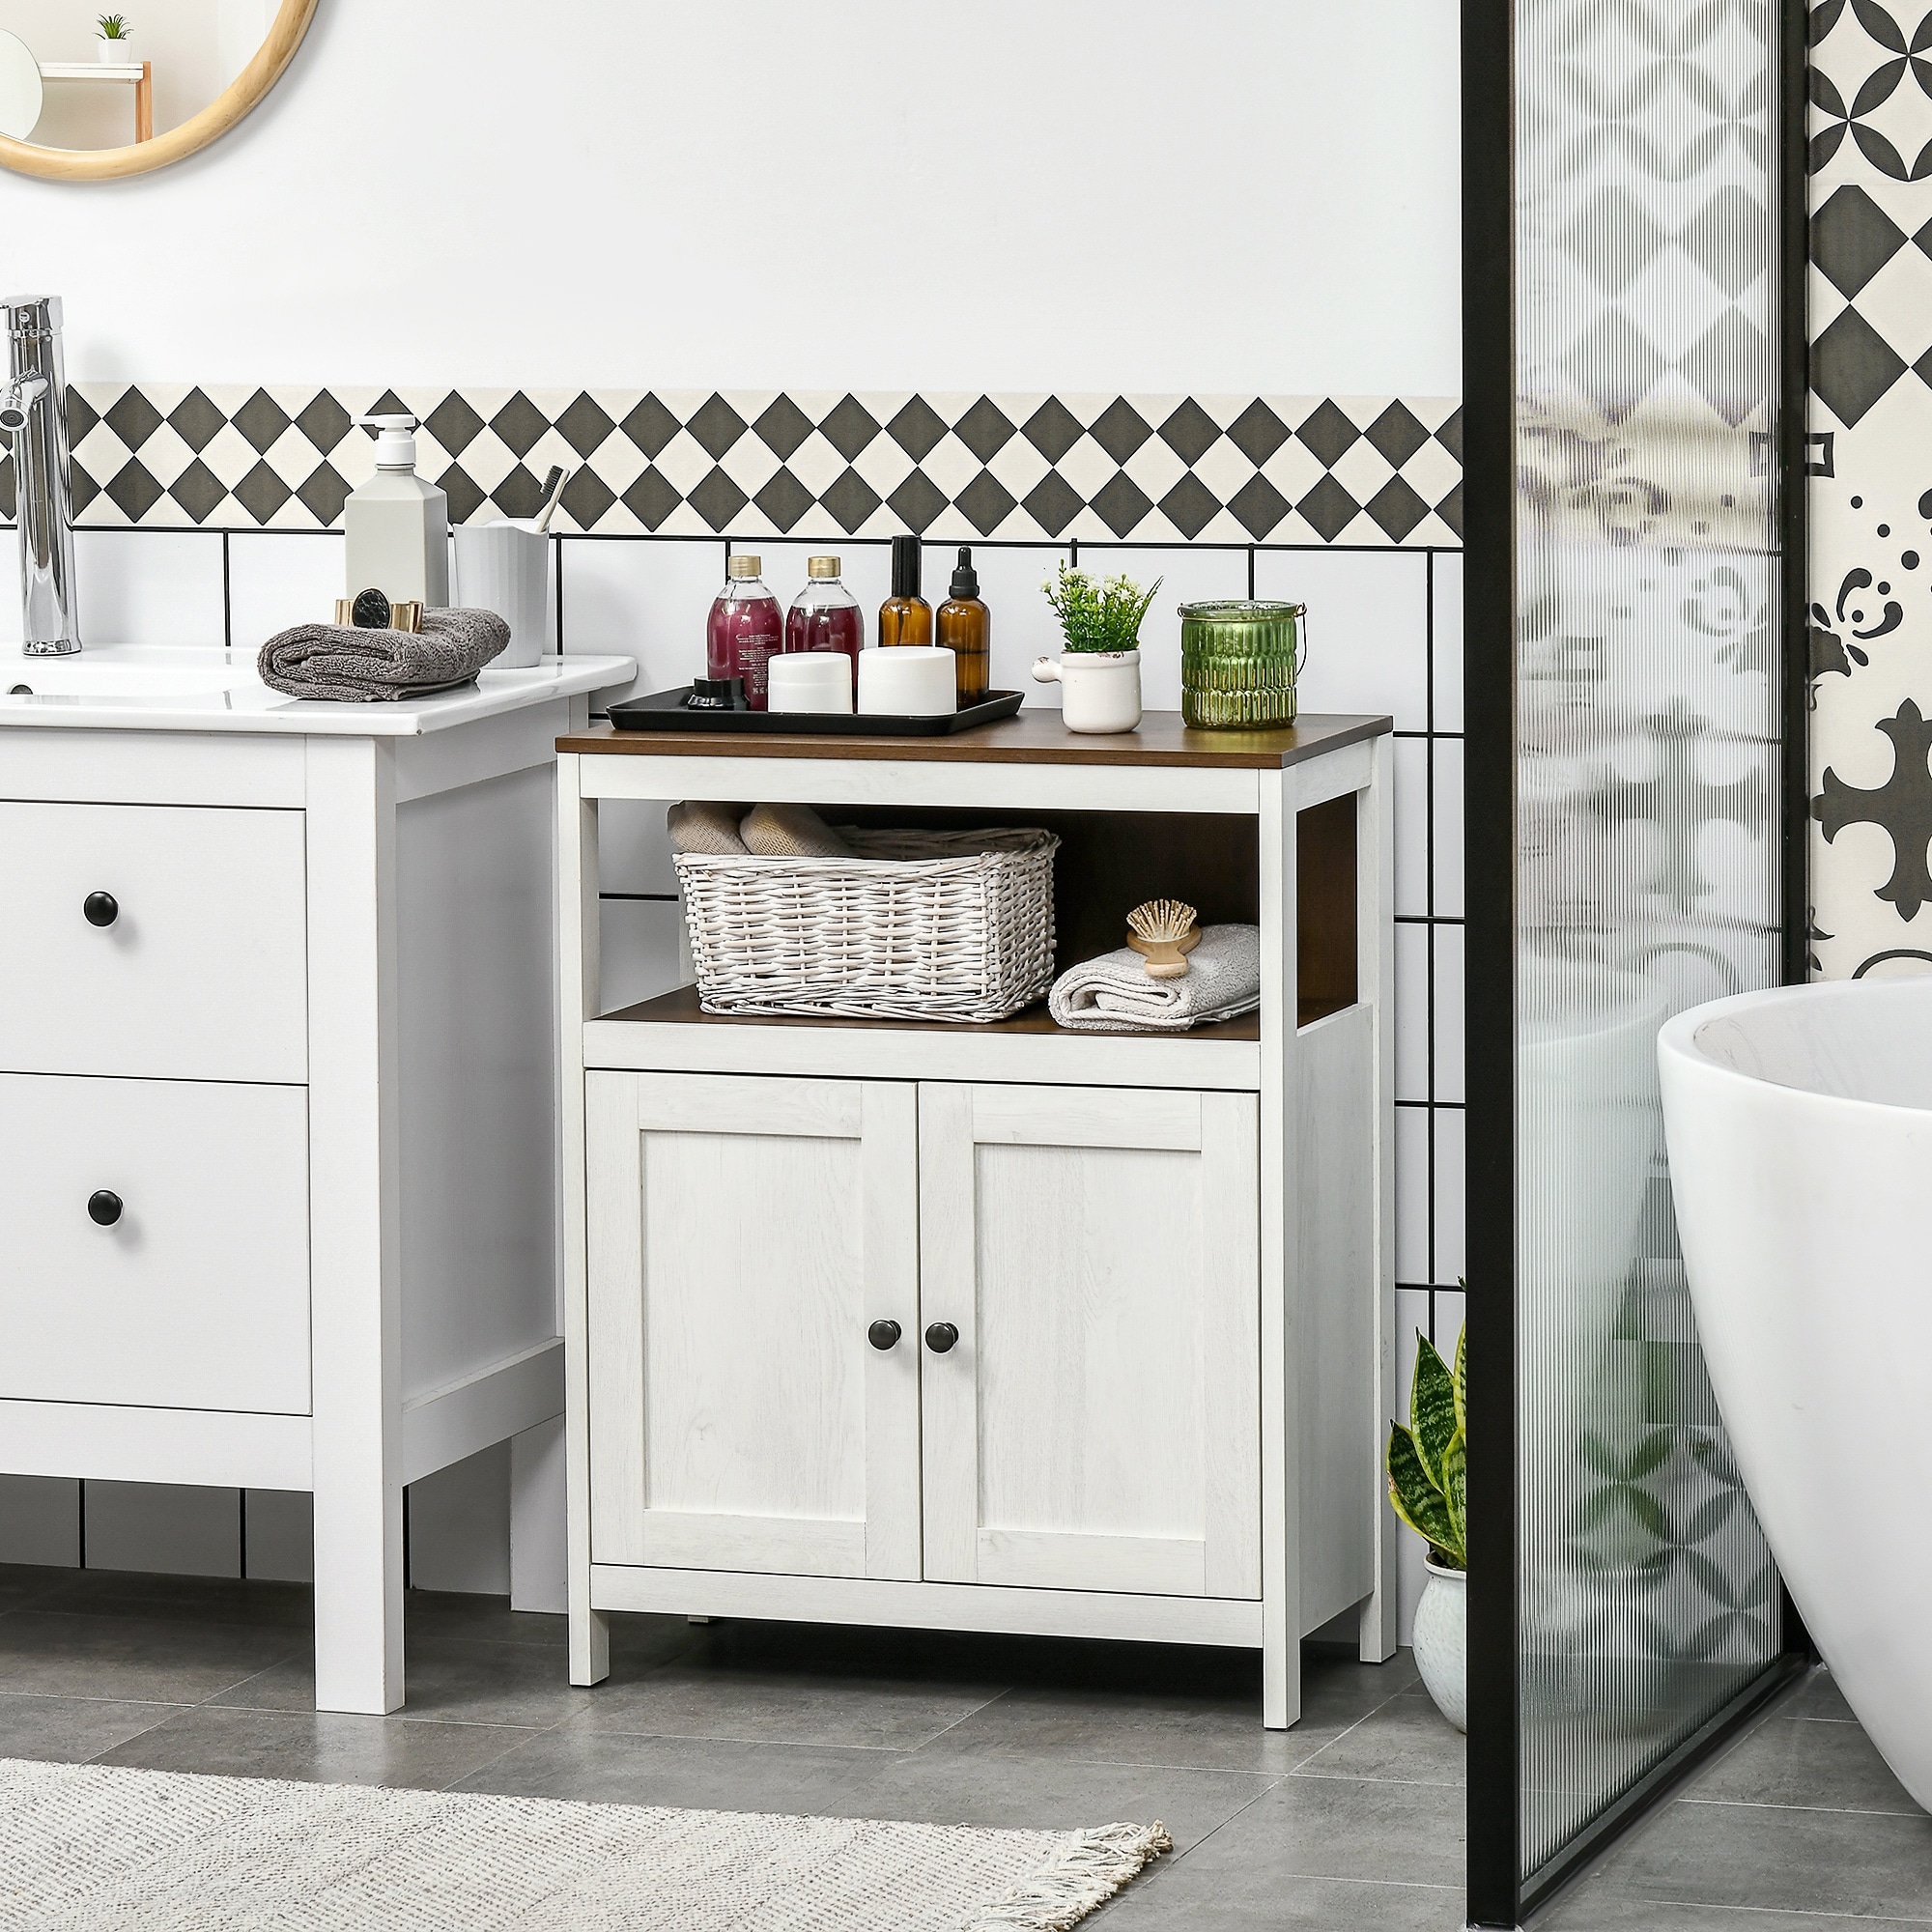 https://ak1.ostkcdn.com/images/products/is/images/direct/cf84250ad8672abd63fa9a2d346a98320de6a895/kleankin-Modern-Bathroom-Storage-Cabinet%2C-Free-Standing-Bathroom-Cabinet%2C-Open-Compartment-and-Cupboard-with-Adjustable-Shelf.jpg